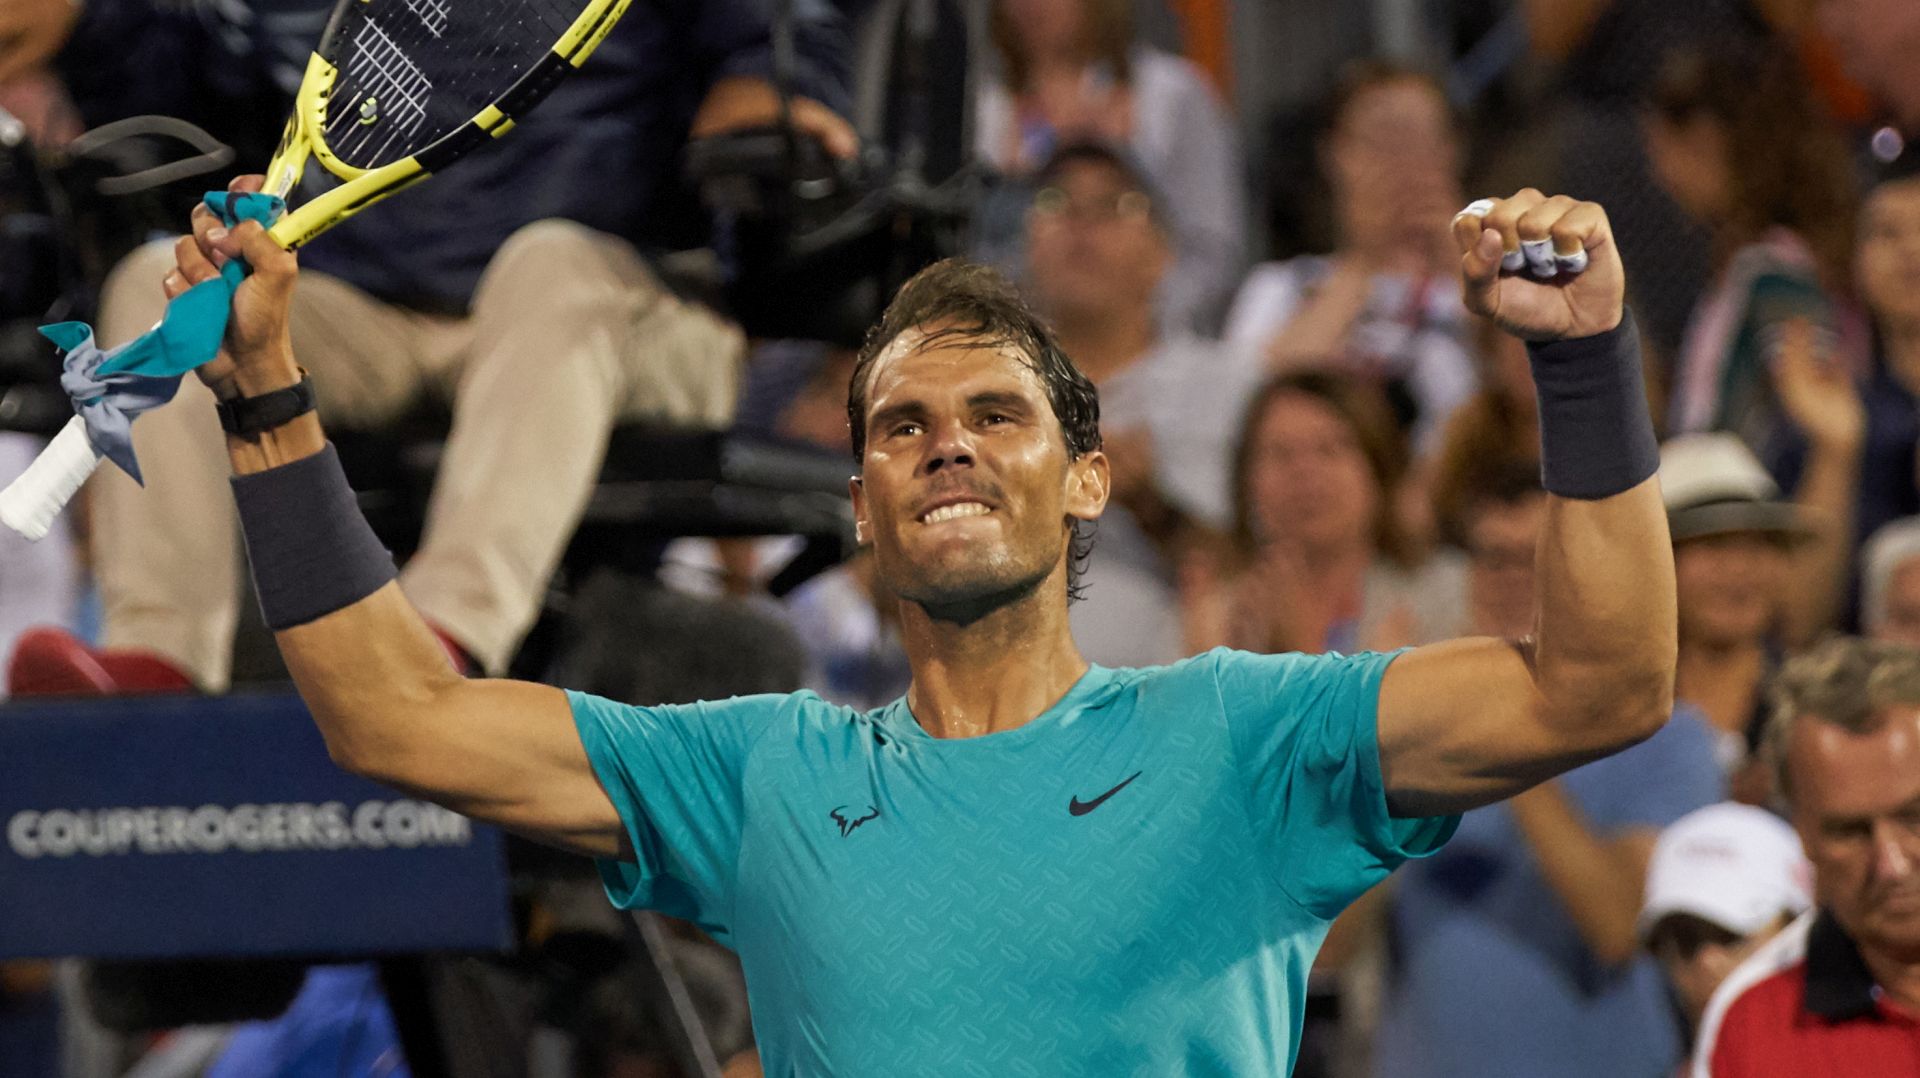 epa07763148 Rafael Nadal of Spain celebrates his victory against Guido Pella of Argentina during the Men's Singles round of 16 at the Rogers Cup tennis tournament in Montreal, Canada, 08 August 2019.  EPA/VALERIE BLUM